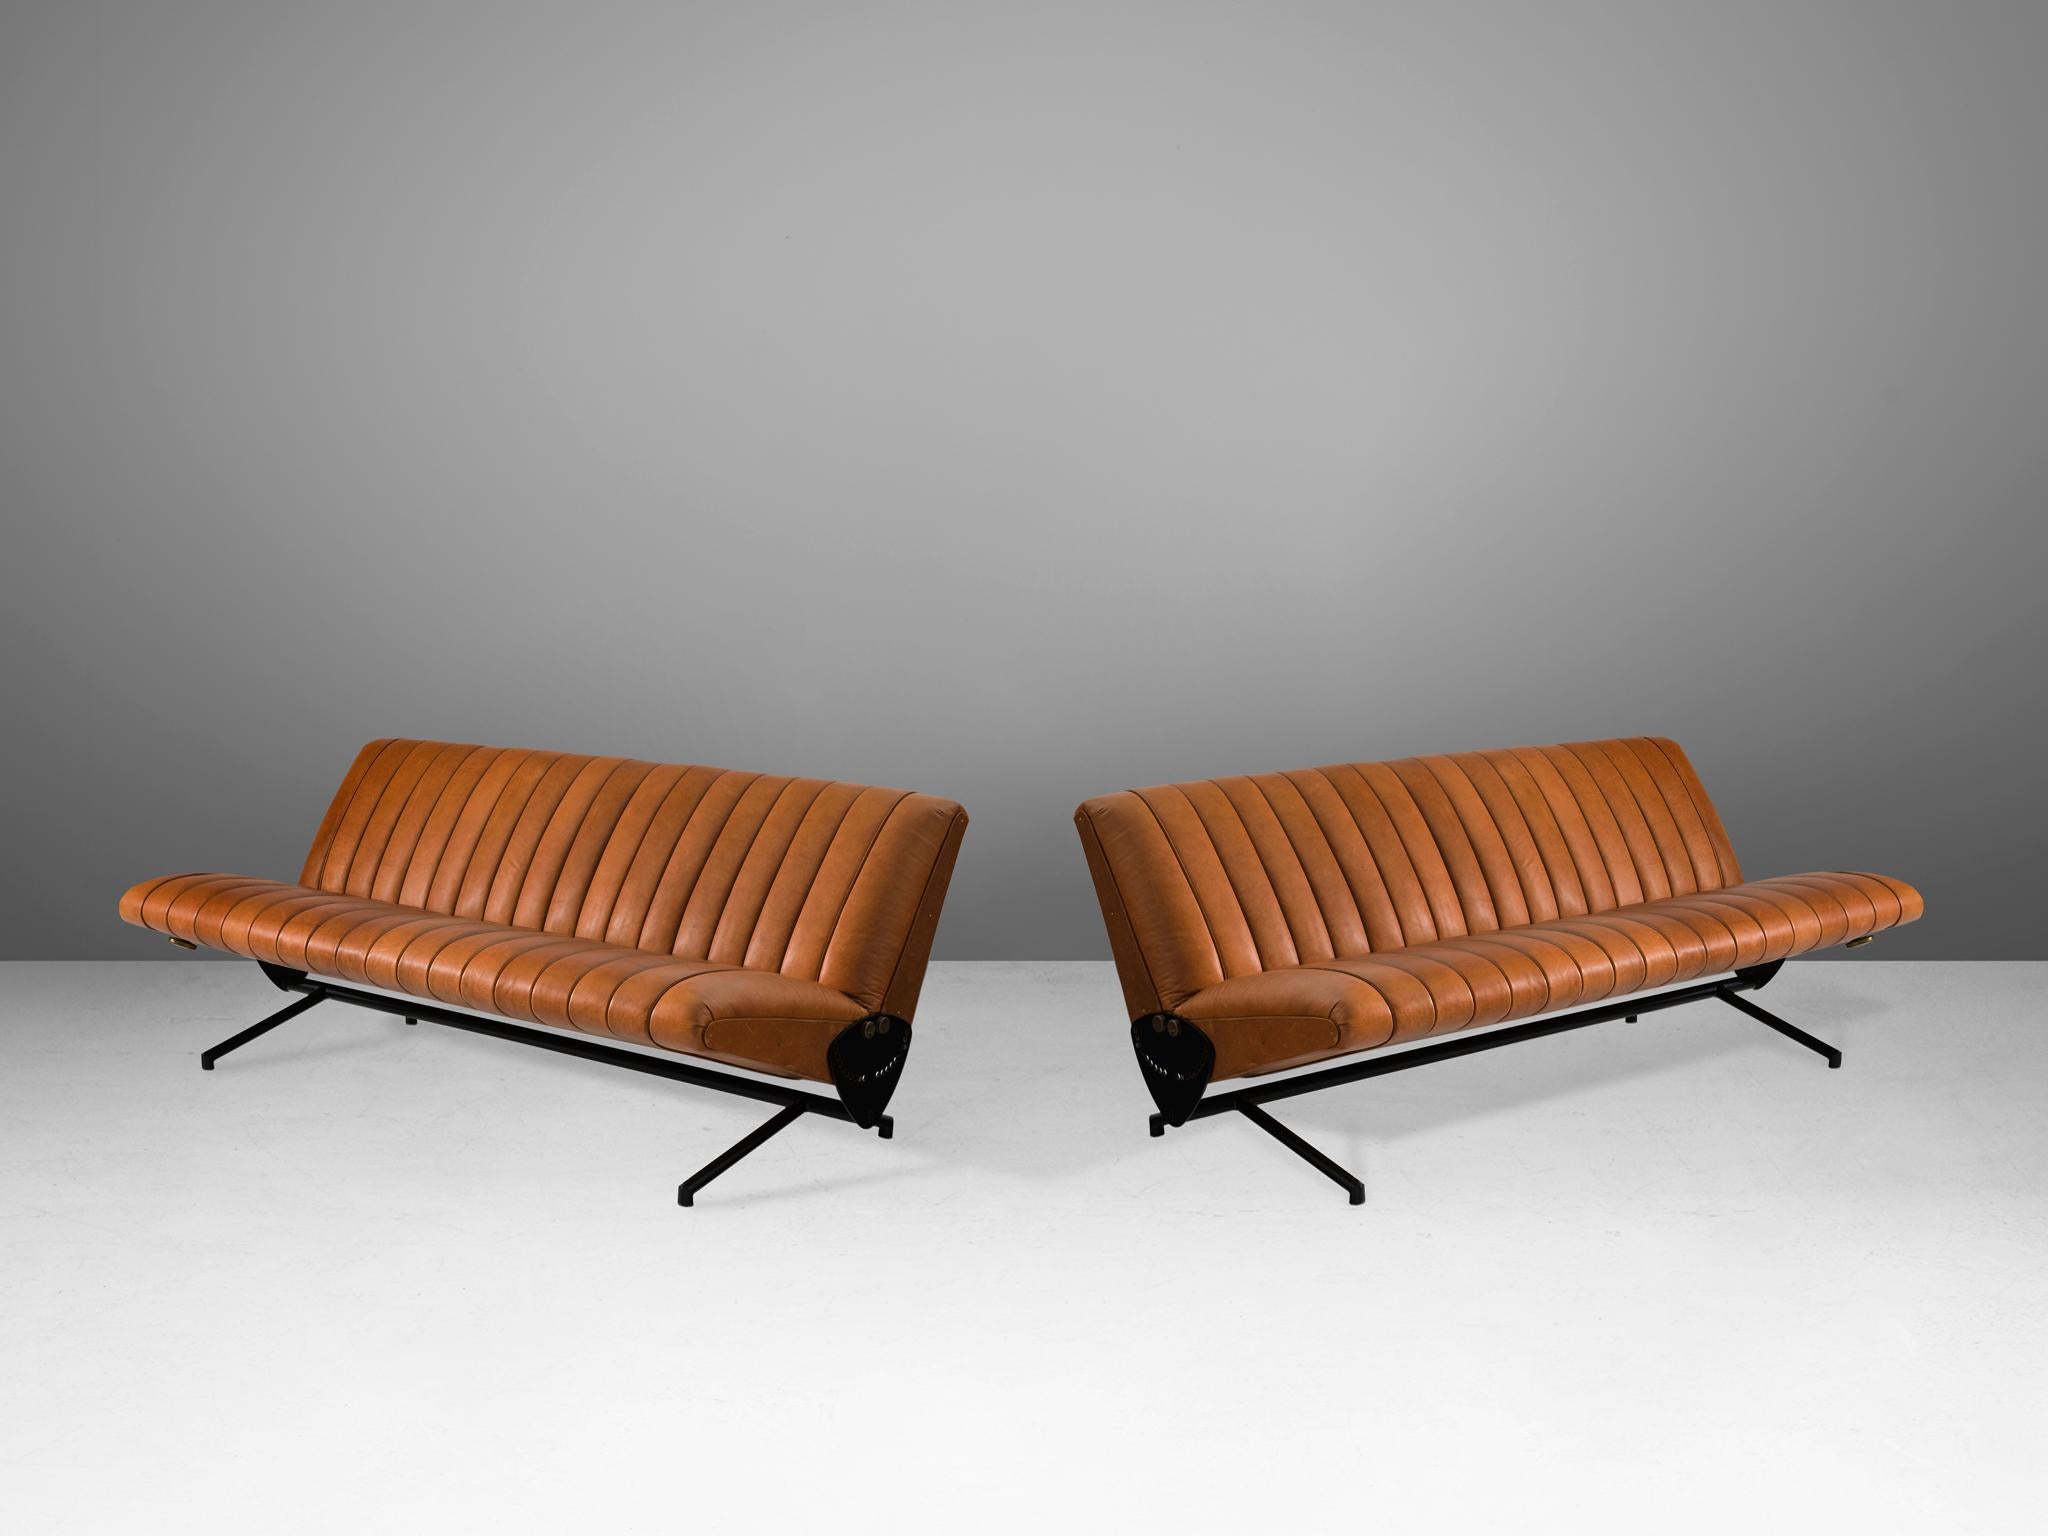 Osvaldo Borsani for Tecno, sofas model D70, in cognac leather, metal and brass, Italy, 1954. 

These iconic sofas by Italian designer Osvaldo Borsani are reupholstered in high-quality brown leather. The vertical stripes of the leather seating